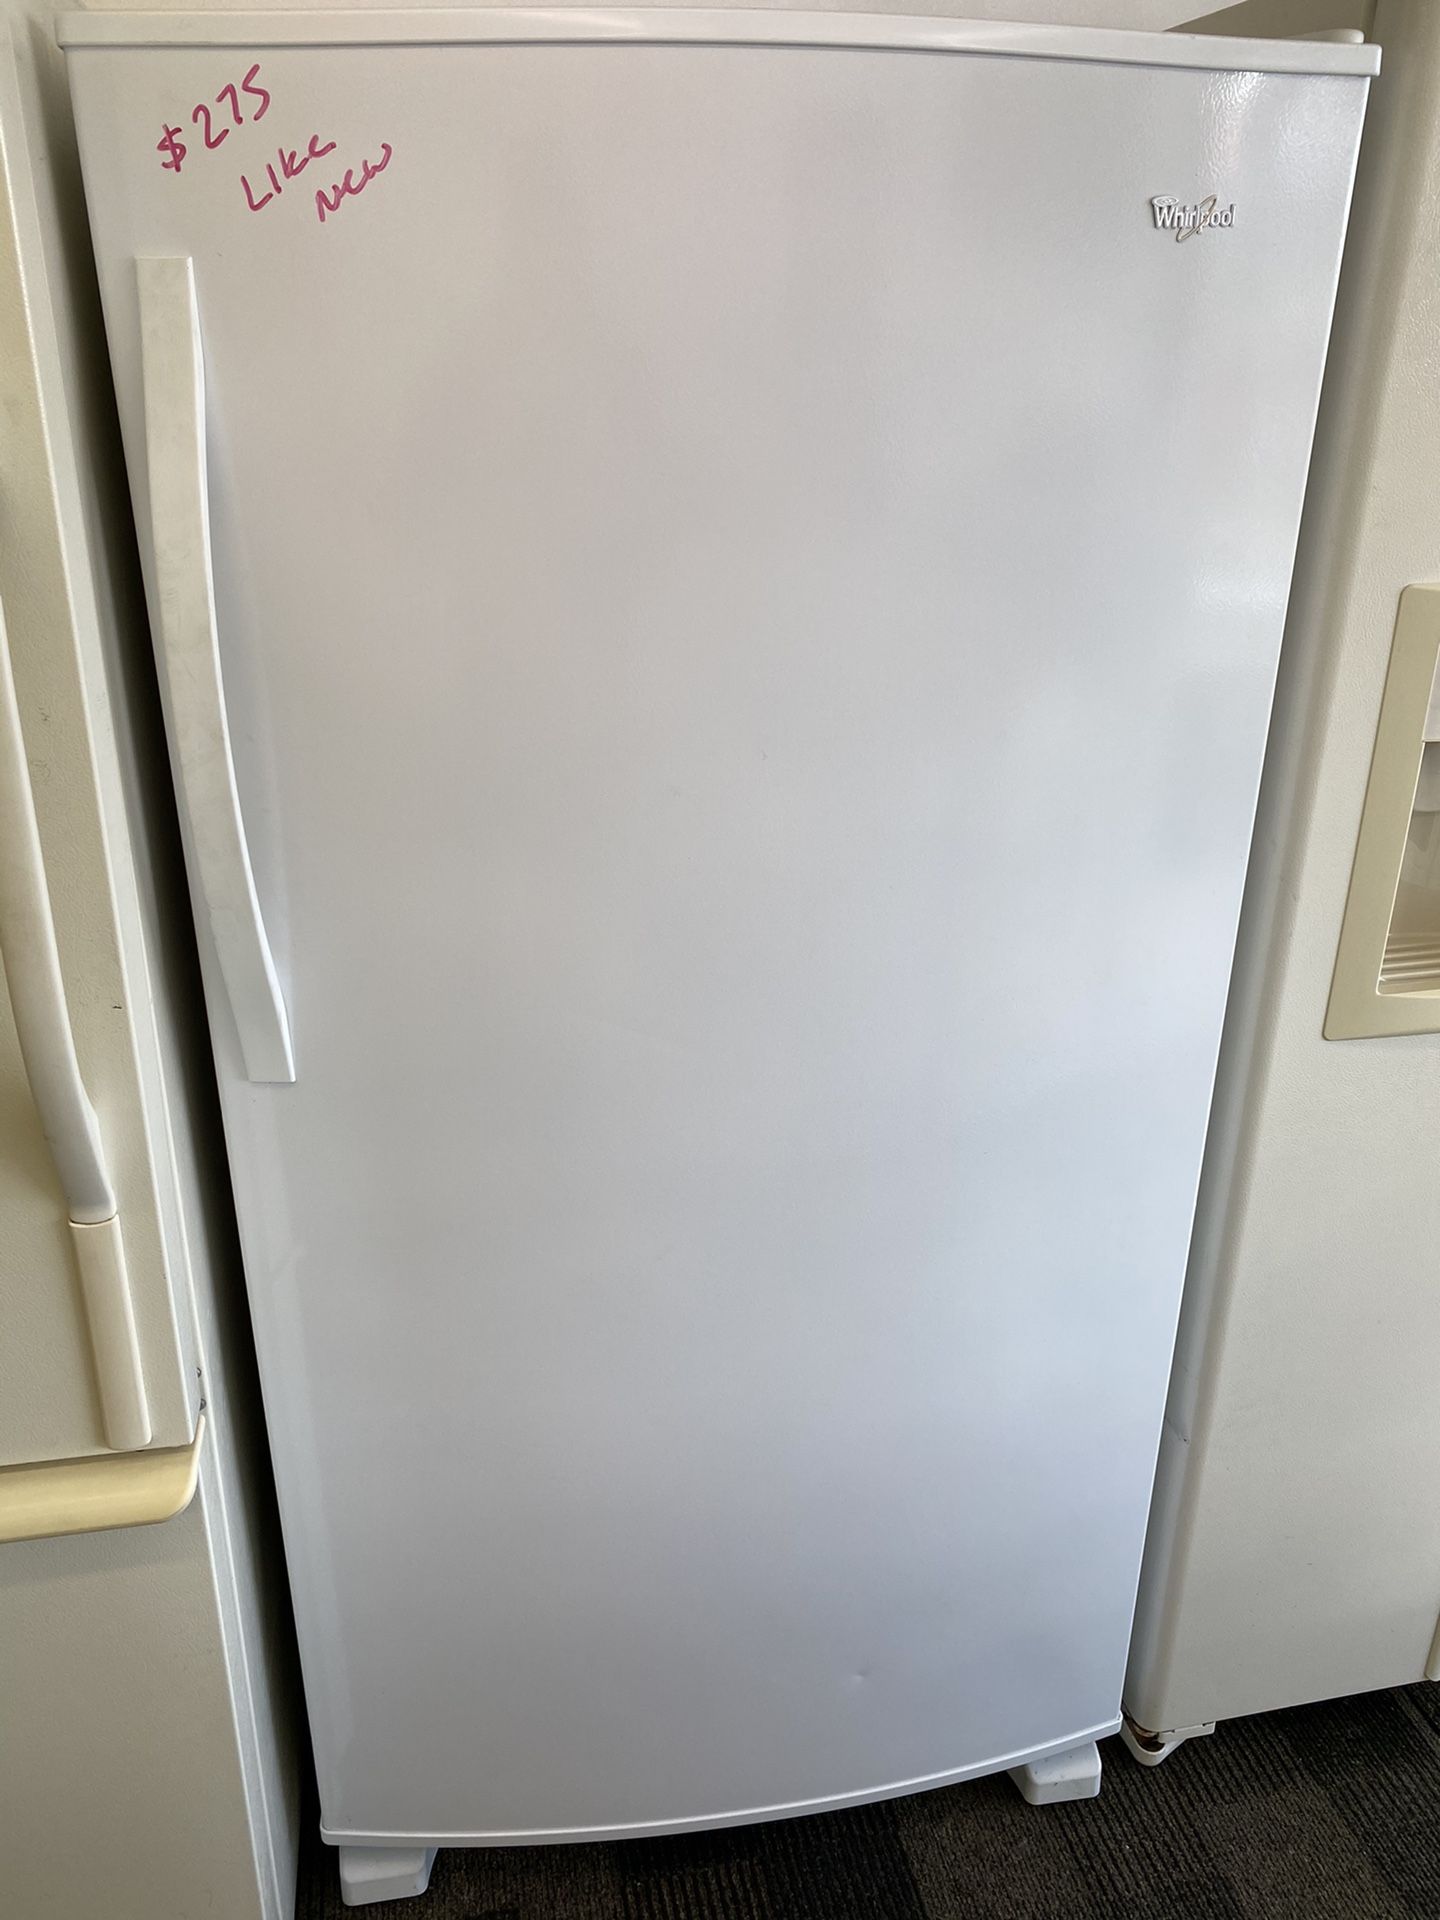 Whirlpool deep freezer like new less than a-year-old